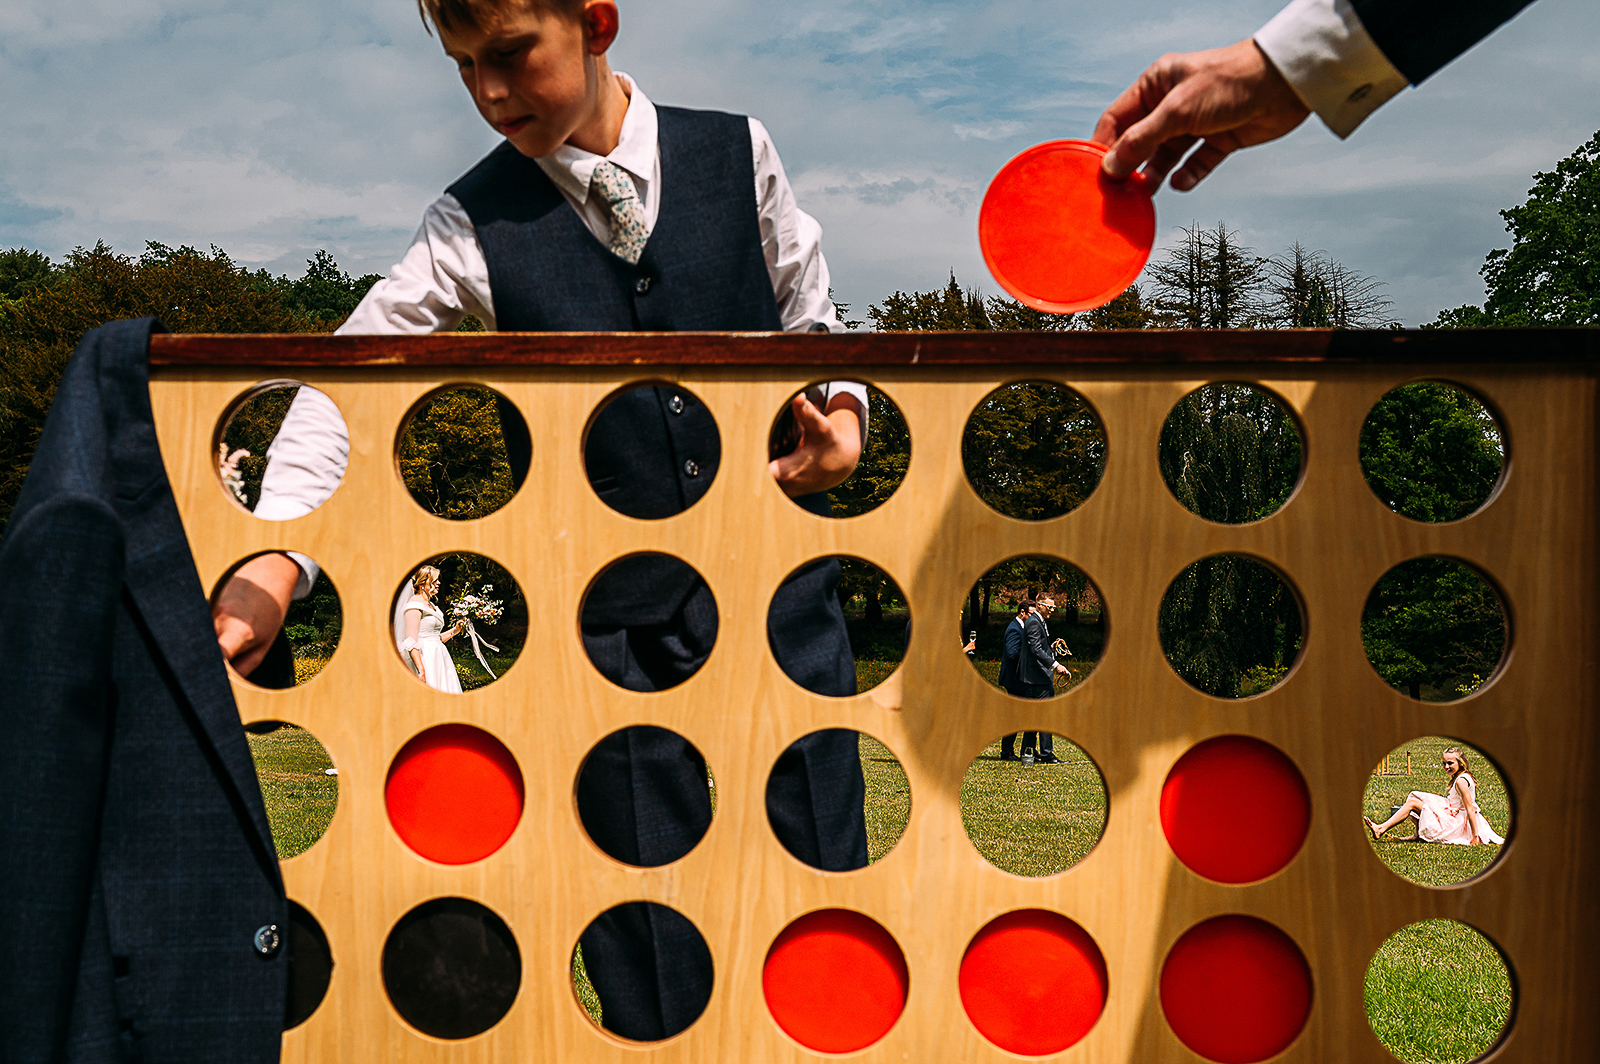 Guests playing connect 4  with other guests in the background shown through the circles.